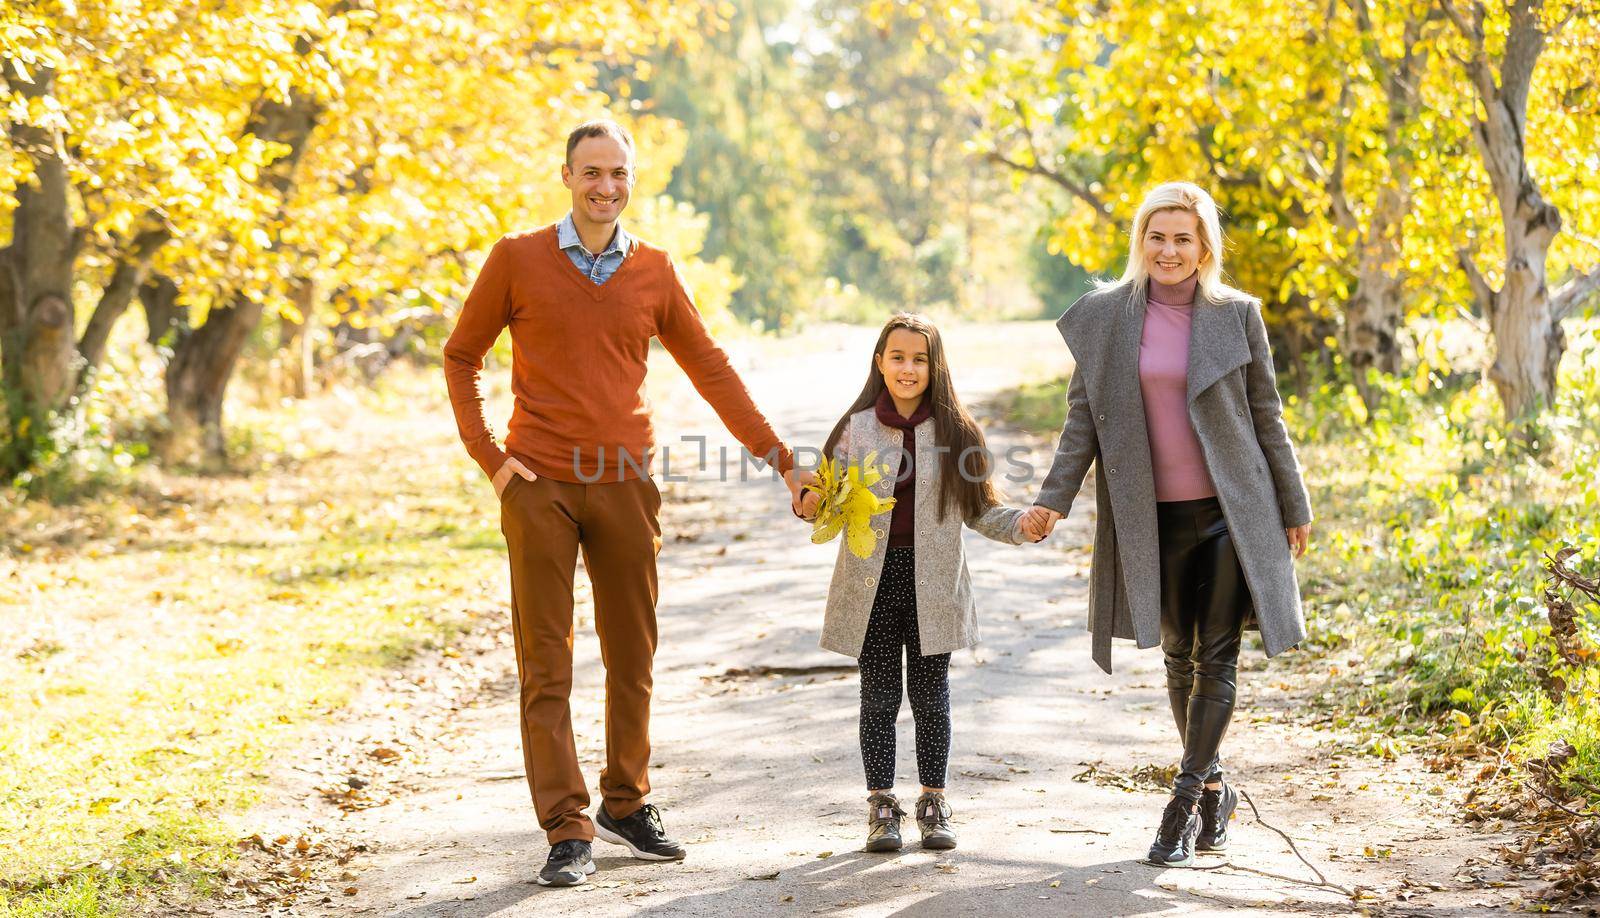 Family playing in autumn park having fun by Andelov13